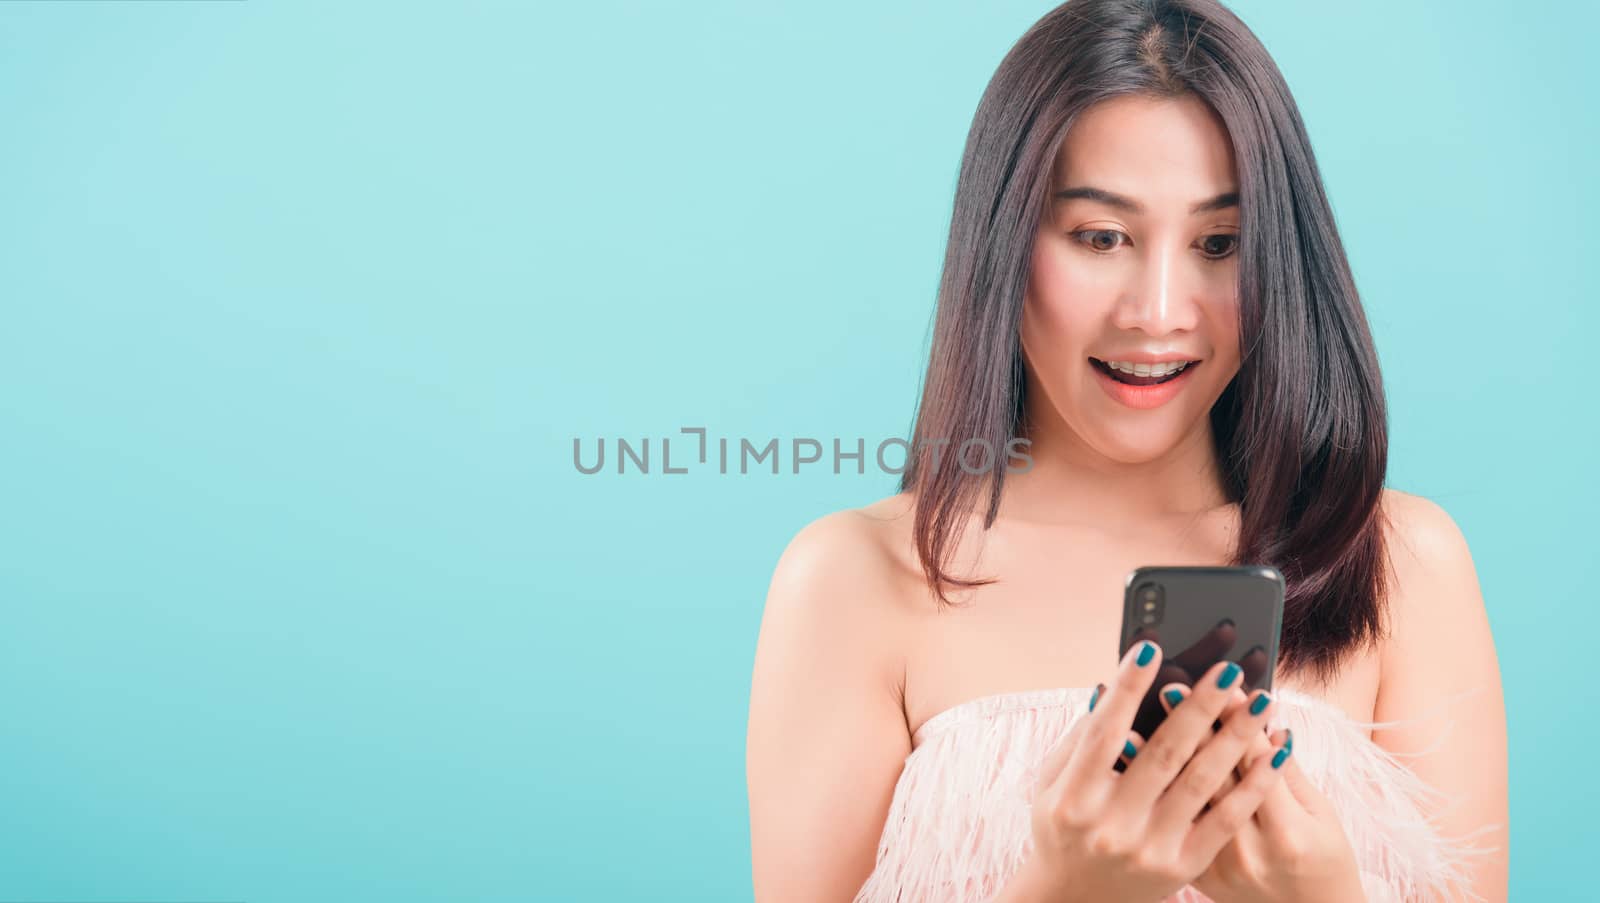 Asian happy portrait beautiful young woman standing smile her  holding smartphone or mobile phone and looking to the phone on blue background with copy space for text